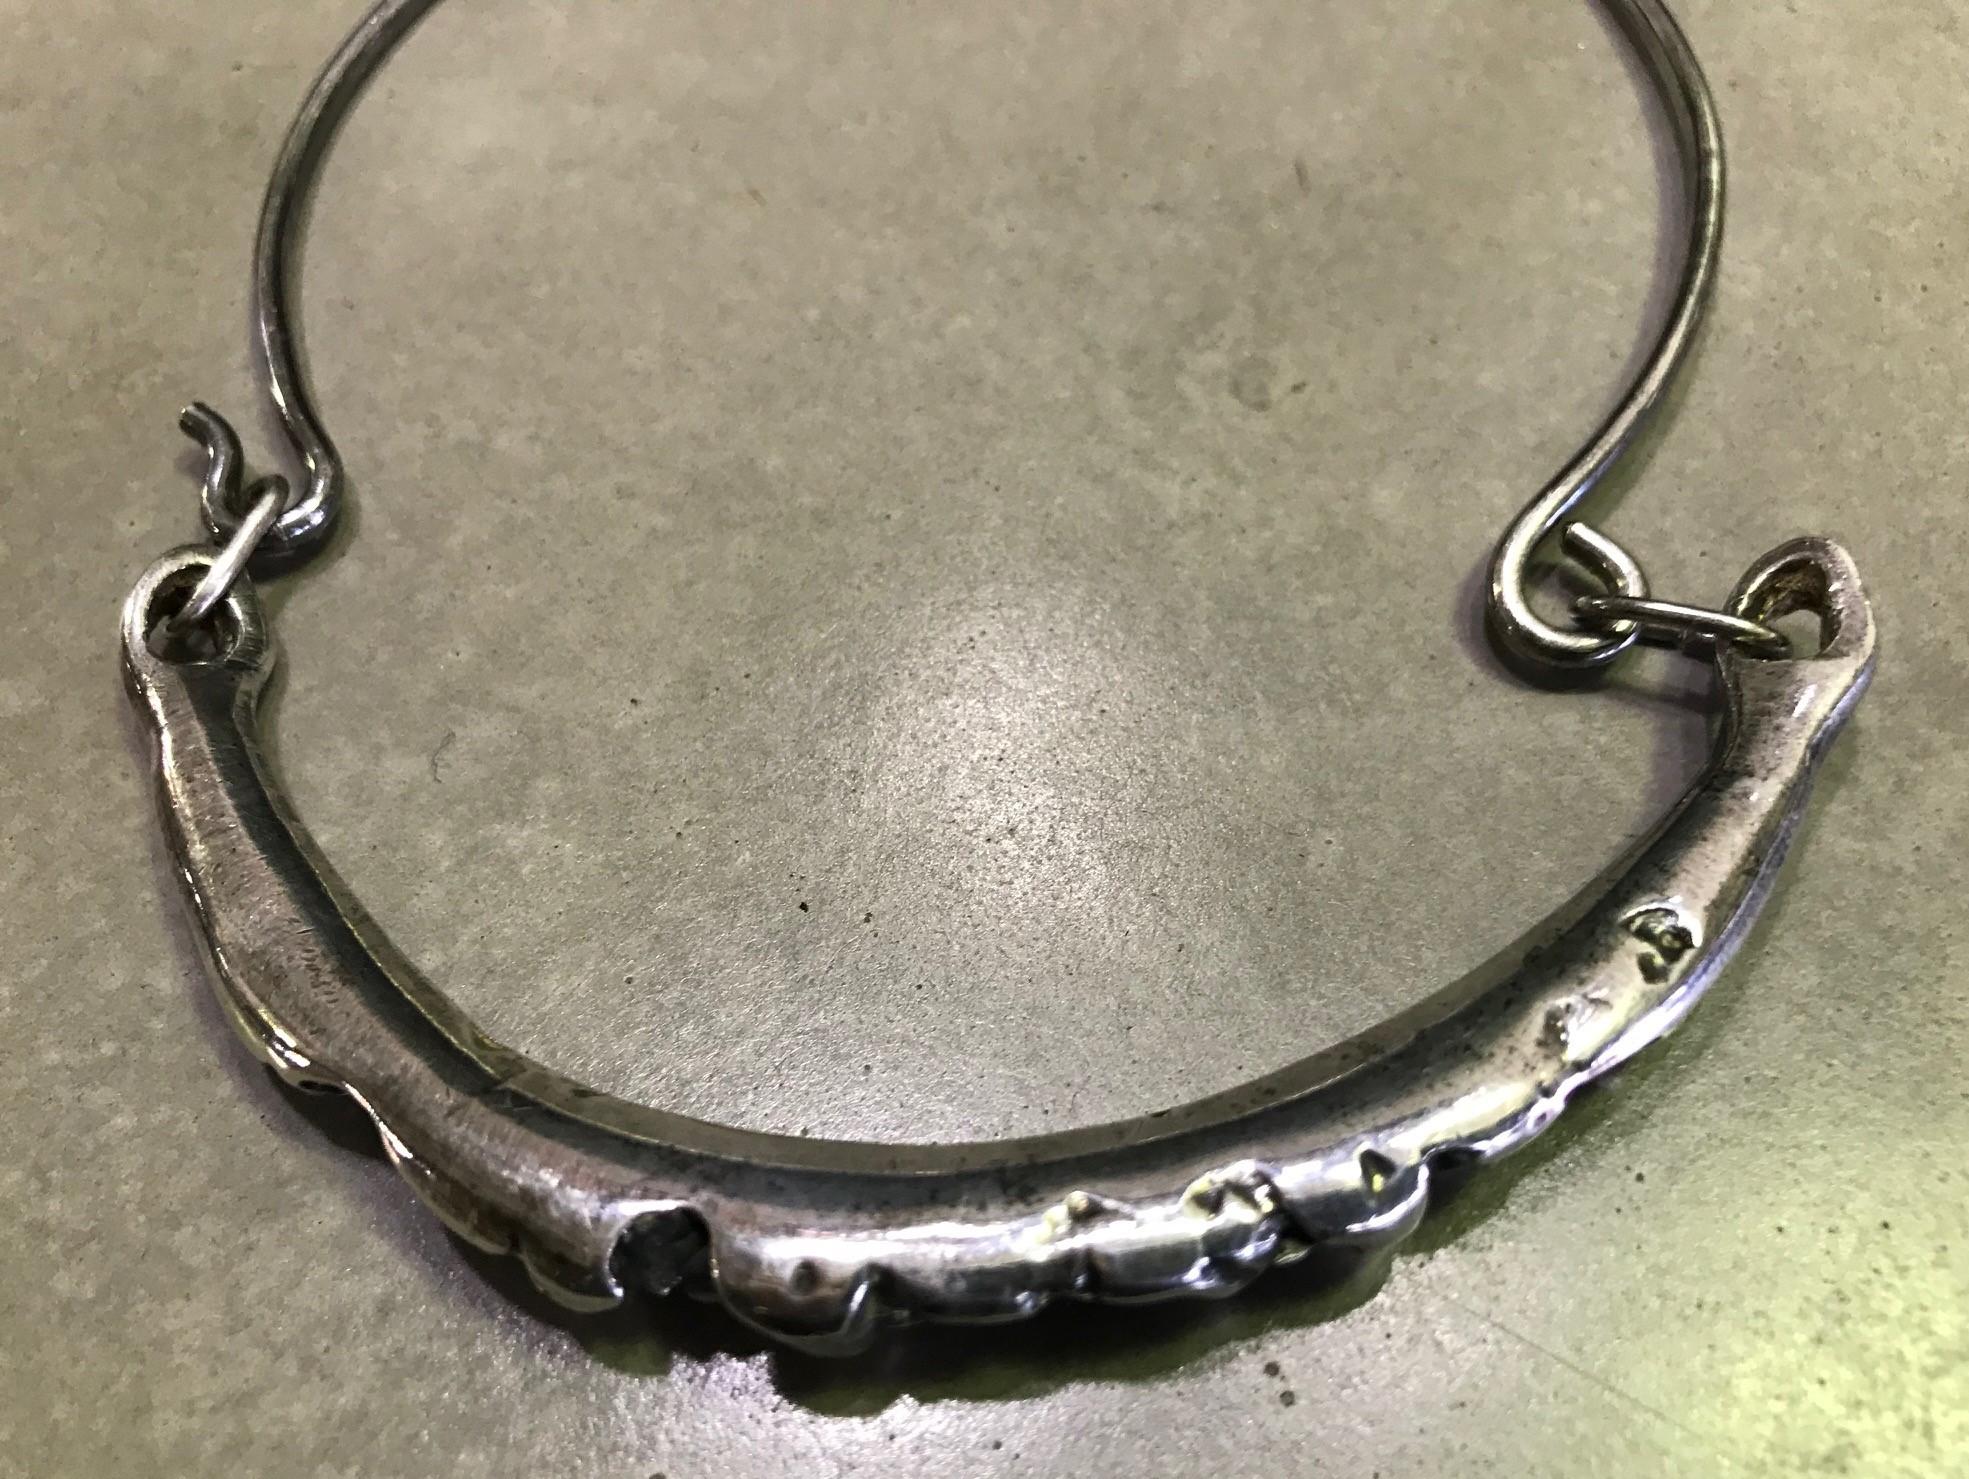 20th Century Mid-Century Modern Brutalist Exquisite Sterling Silver Collar Choker Necklace For Sale